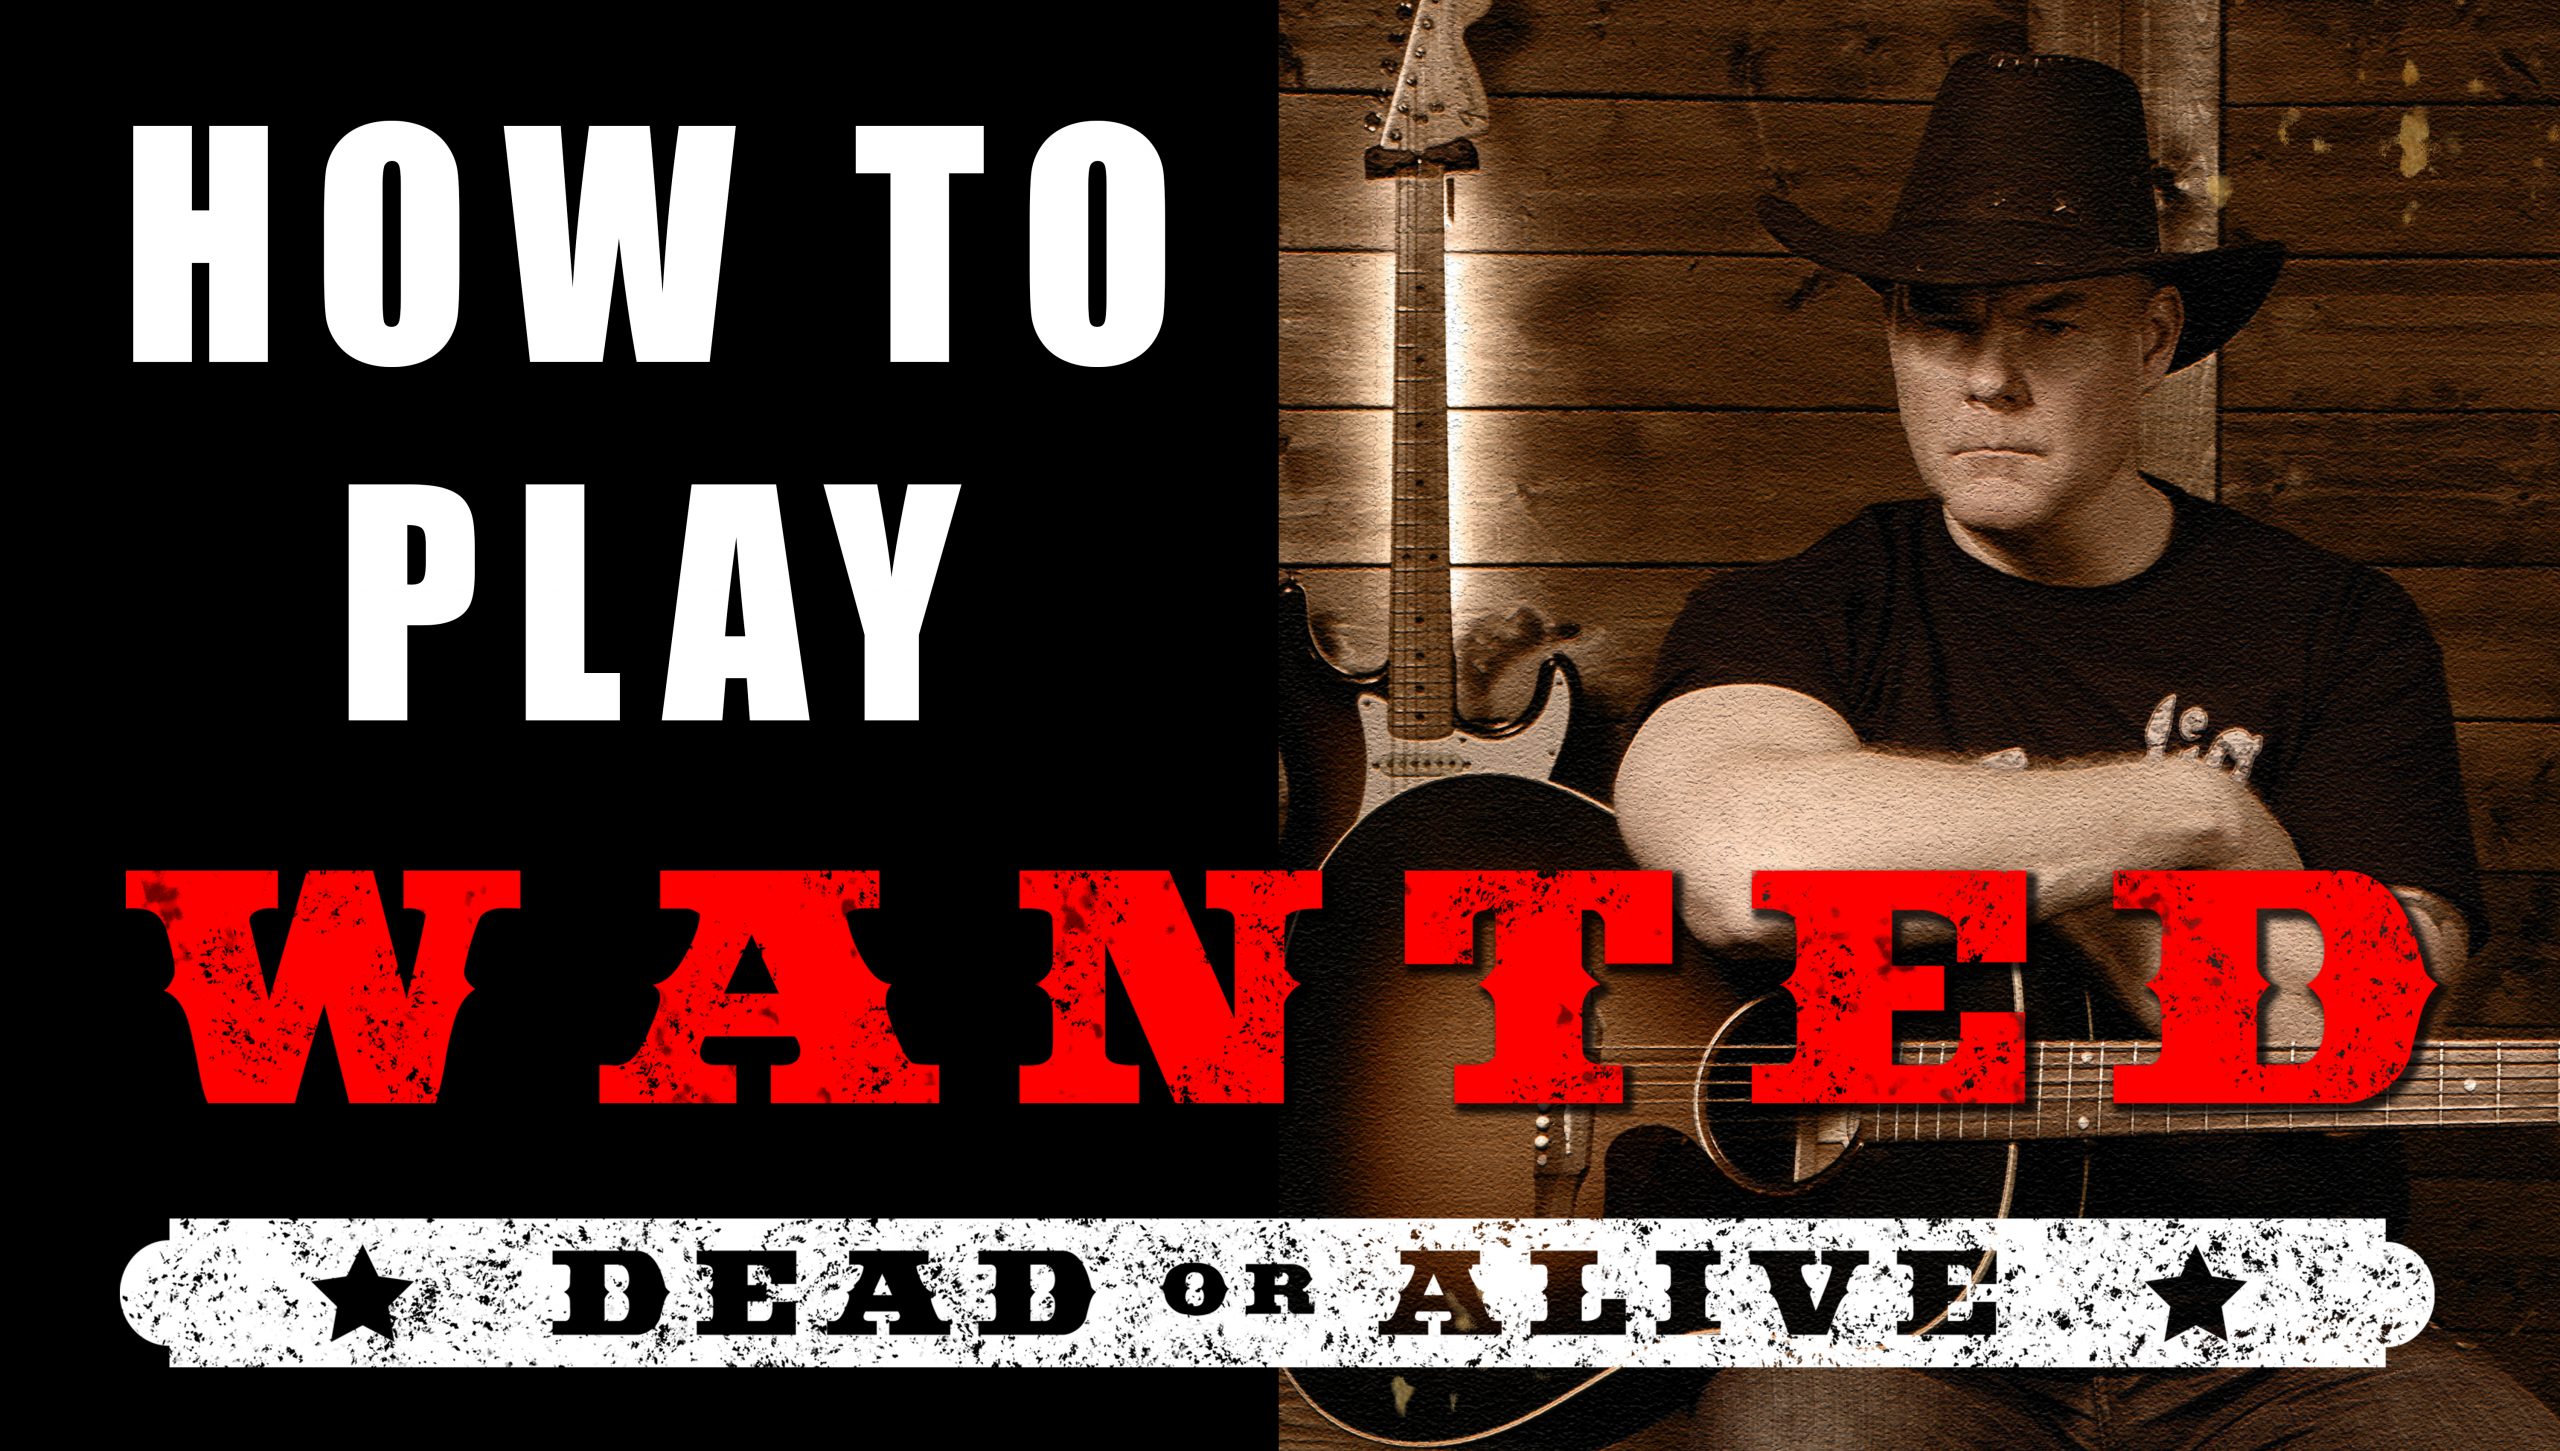 song wanted dead or alive